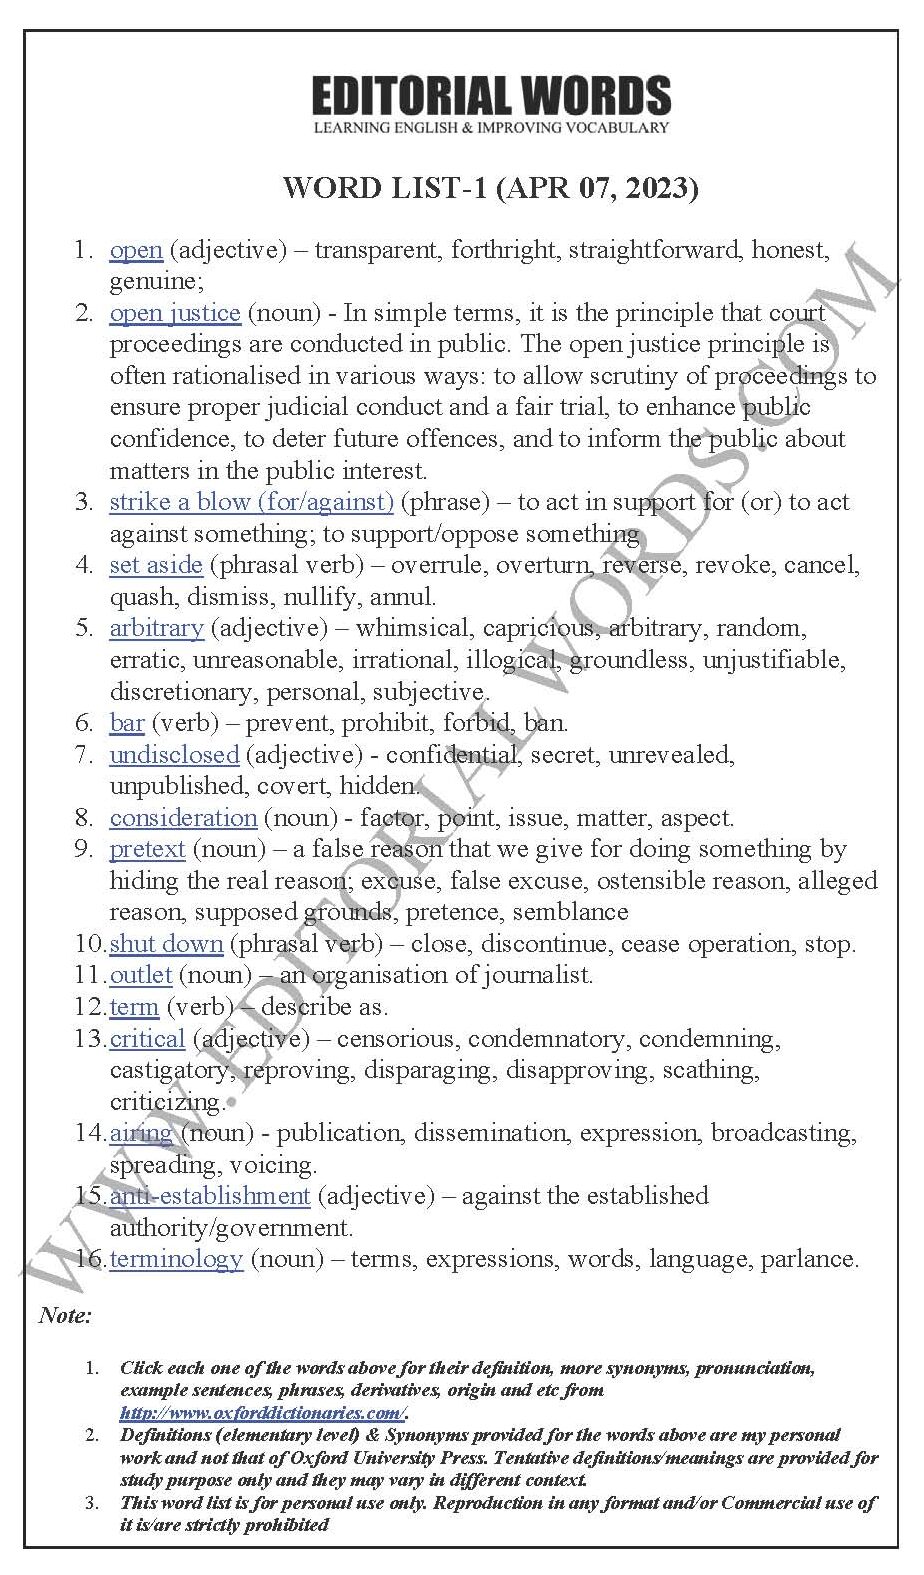 Dismissed synonyms that belongs to adjectives